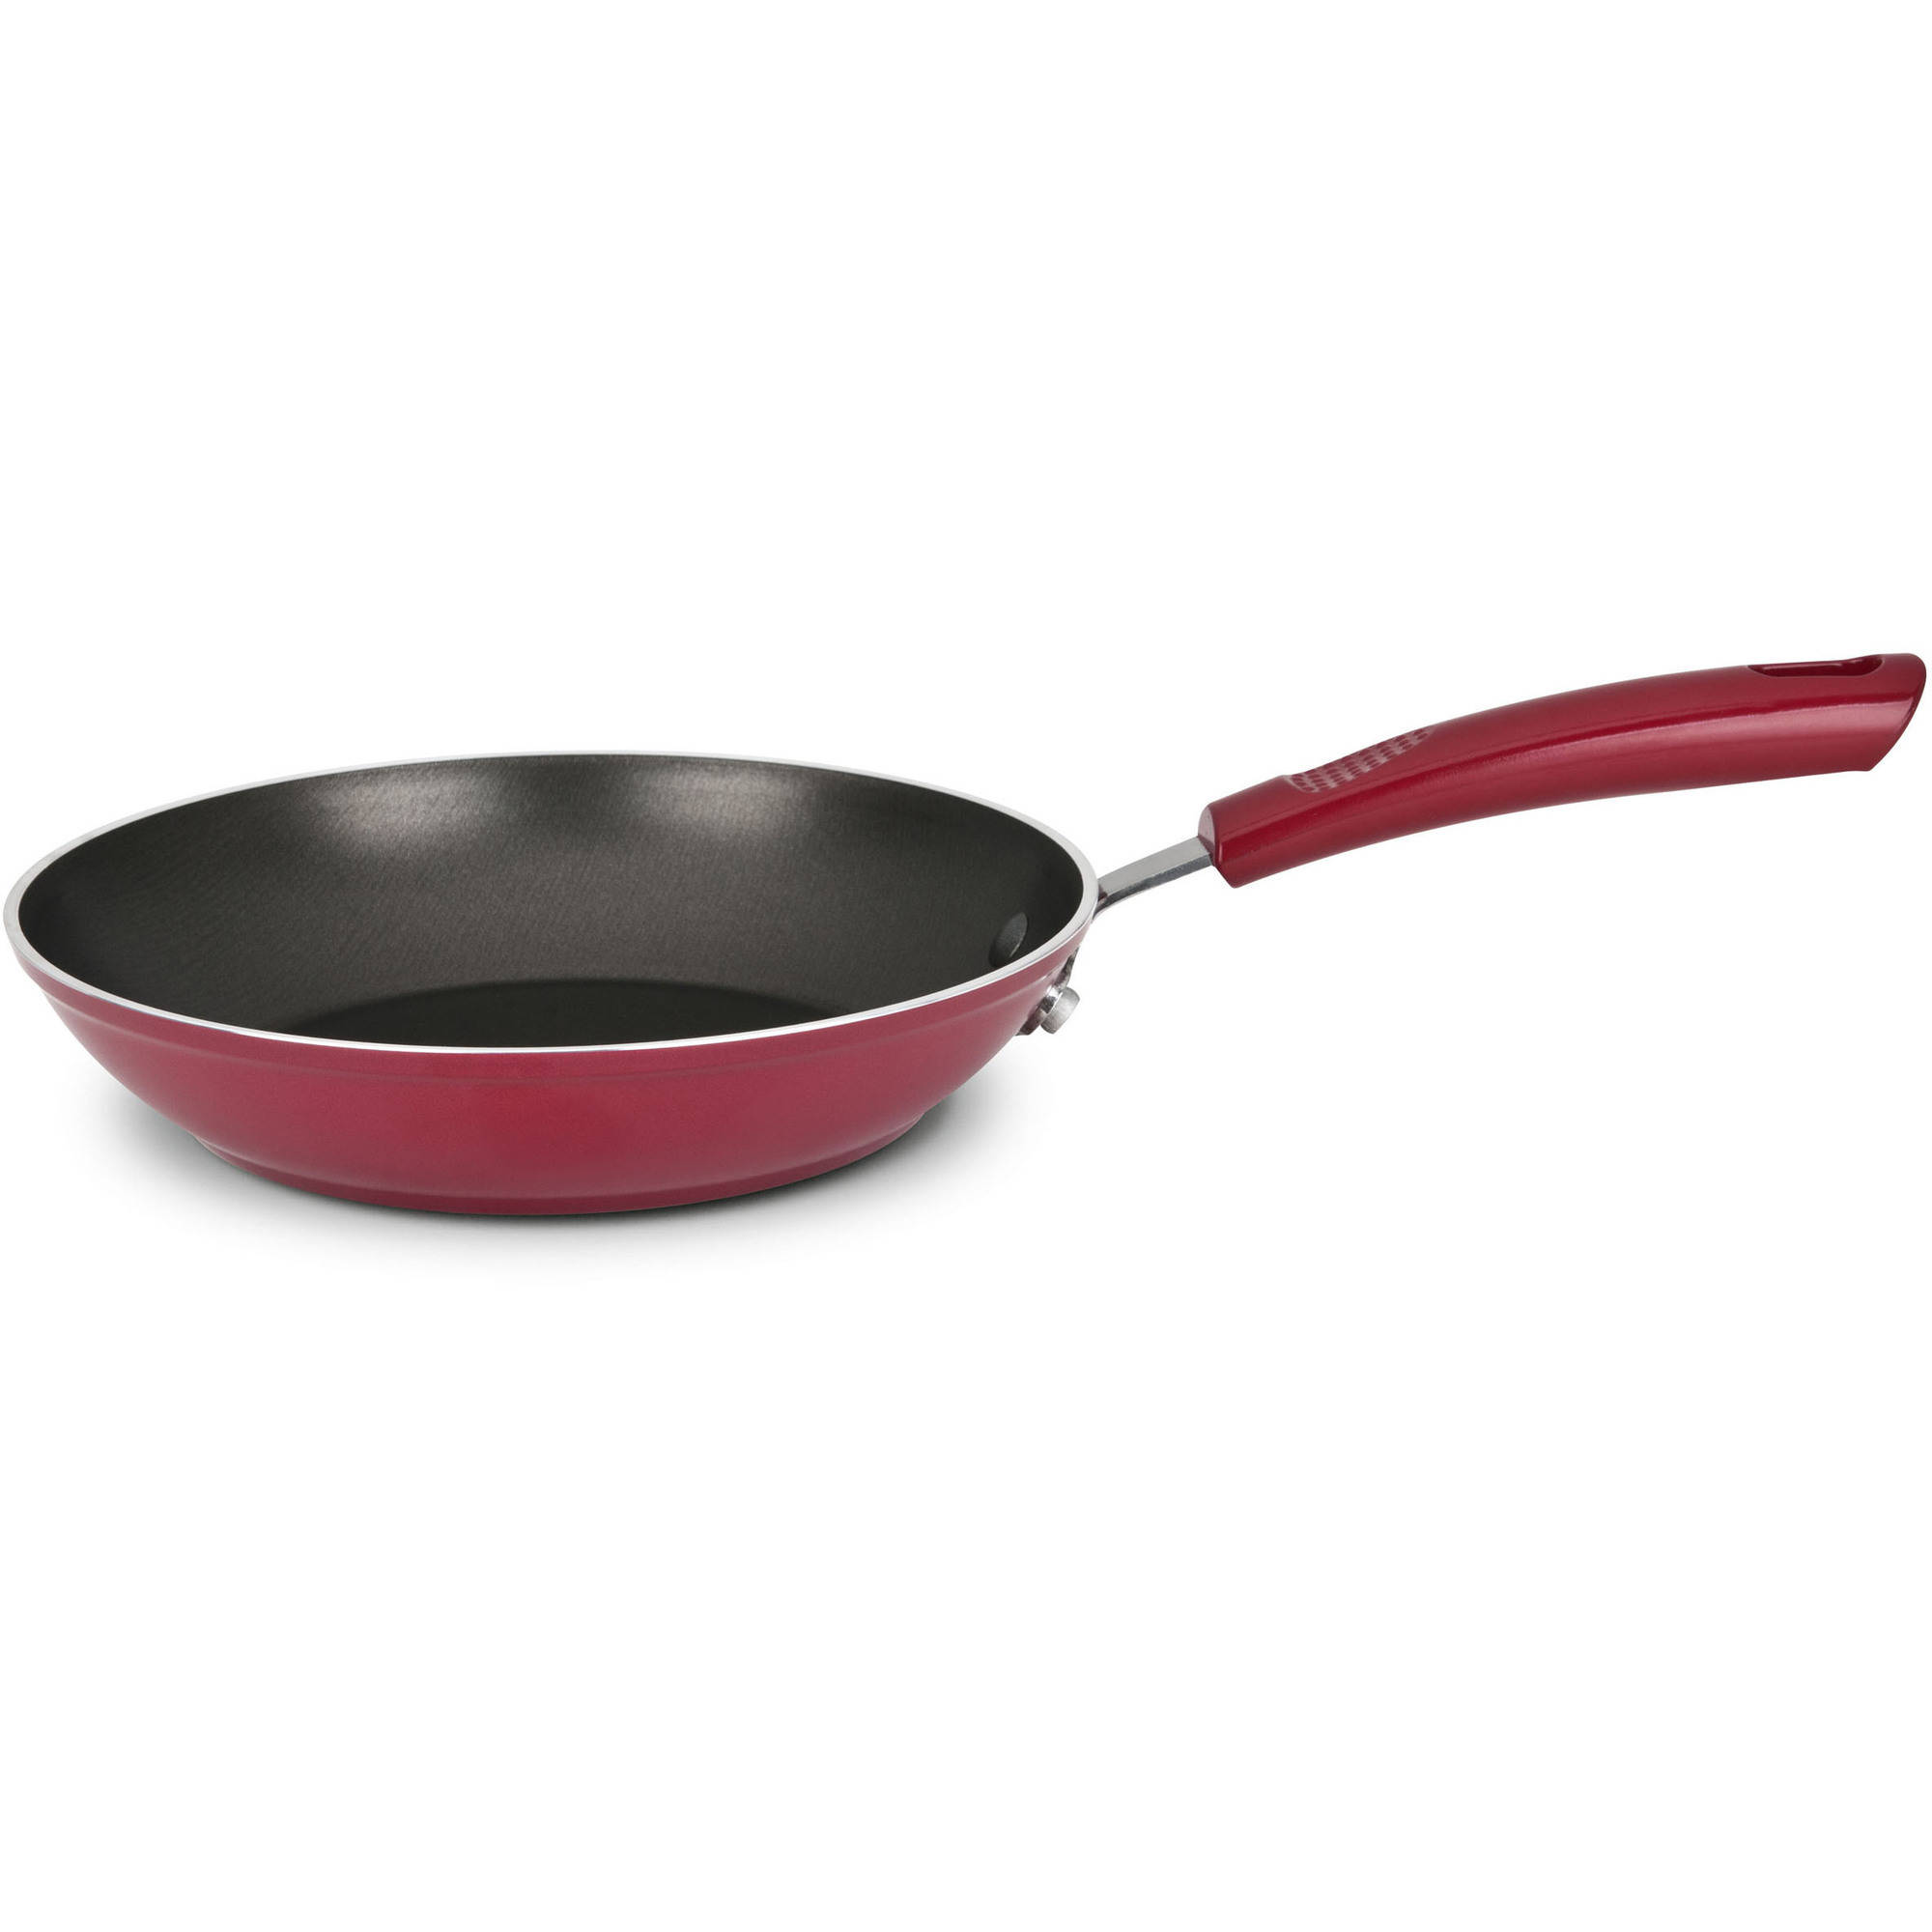 Mainstays 3-Piece Forged Skillet Set, Red - image 3 of 4